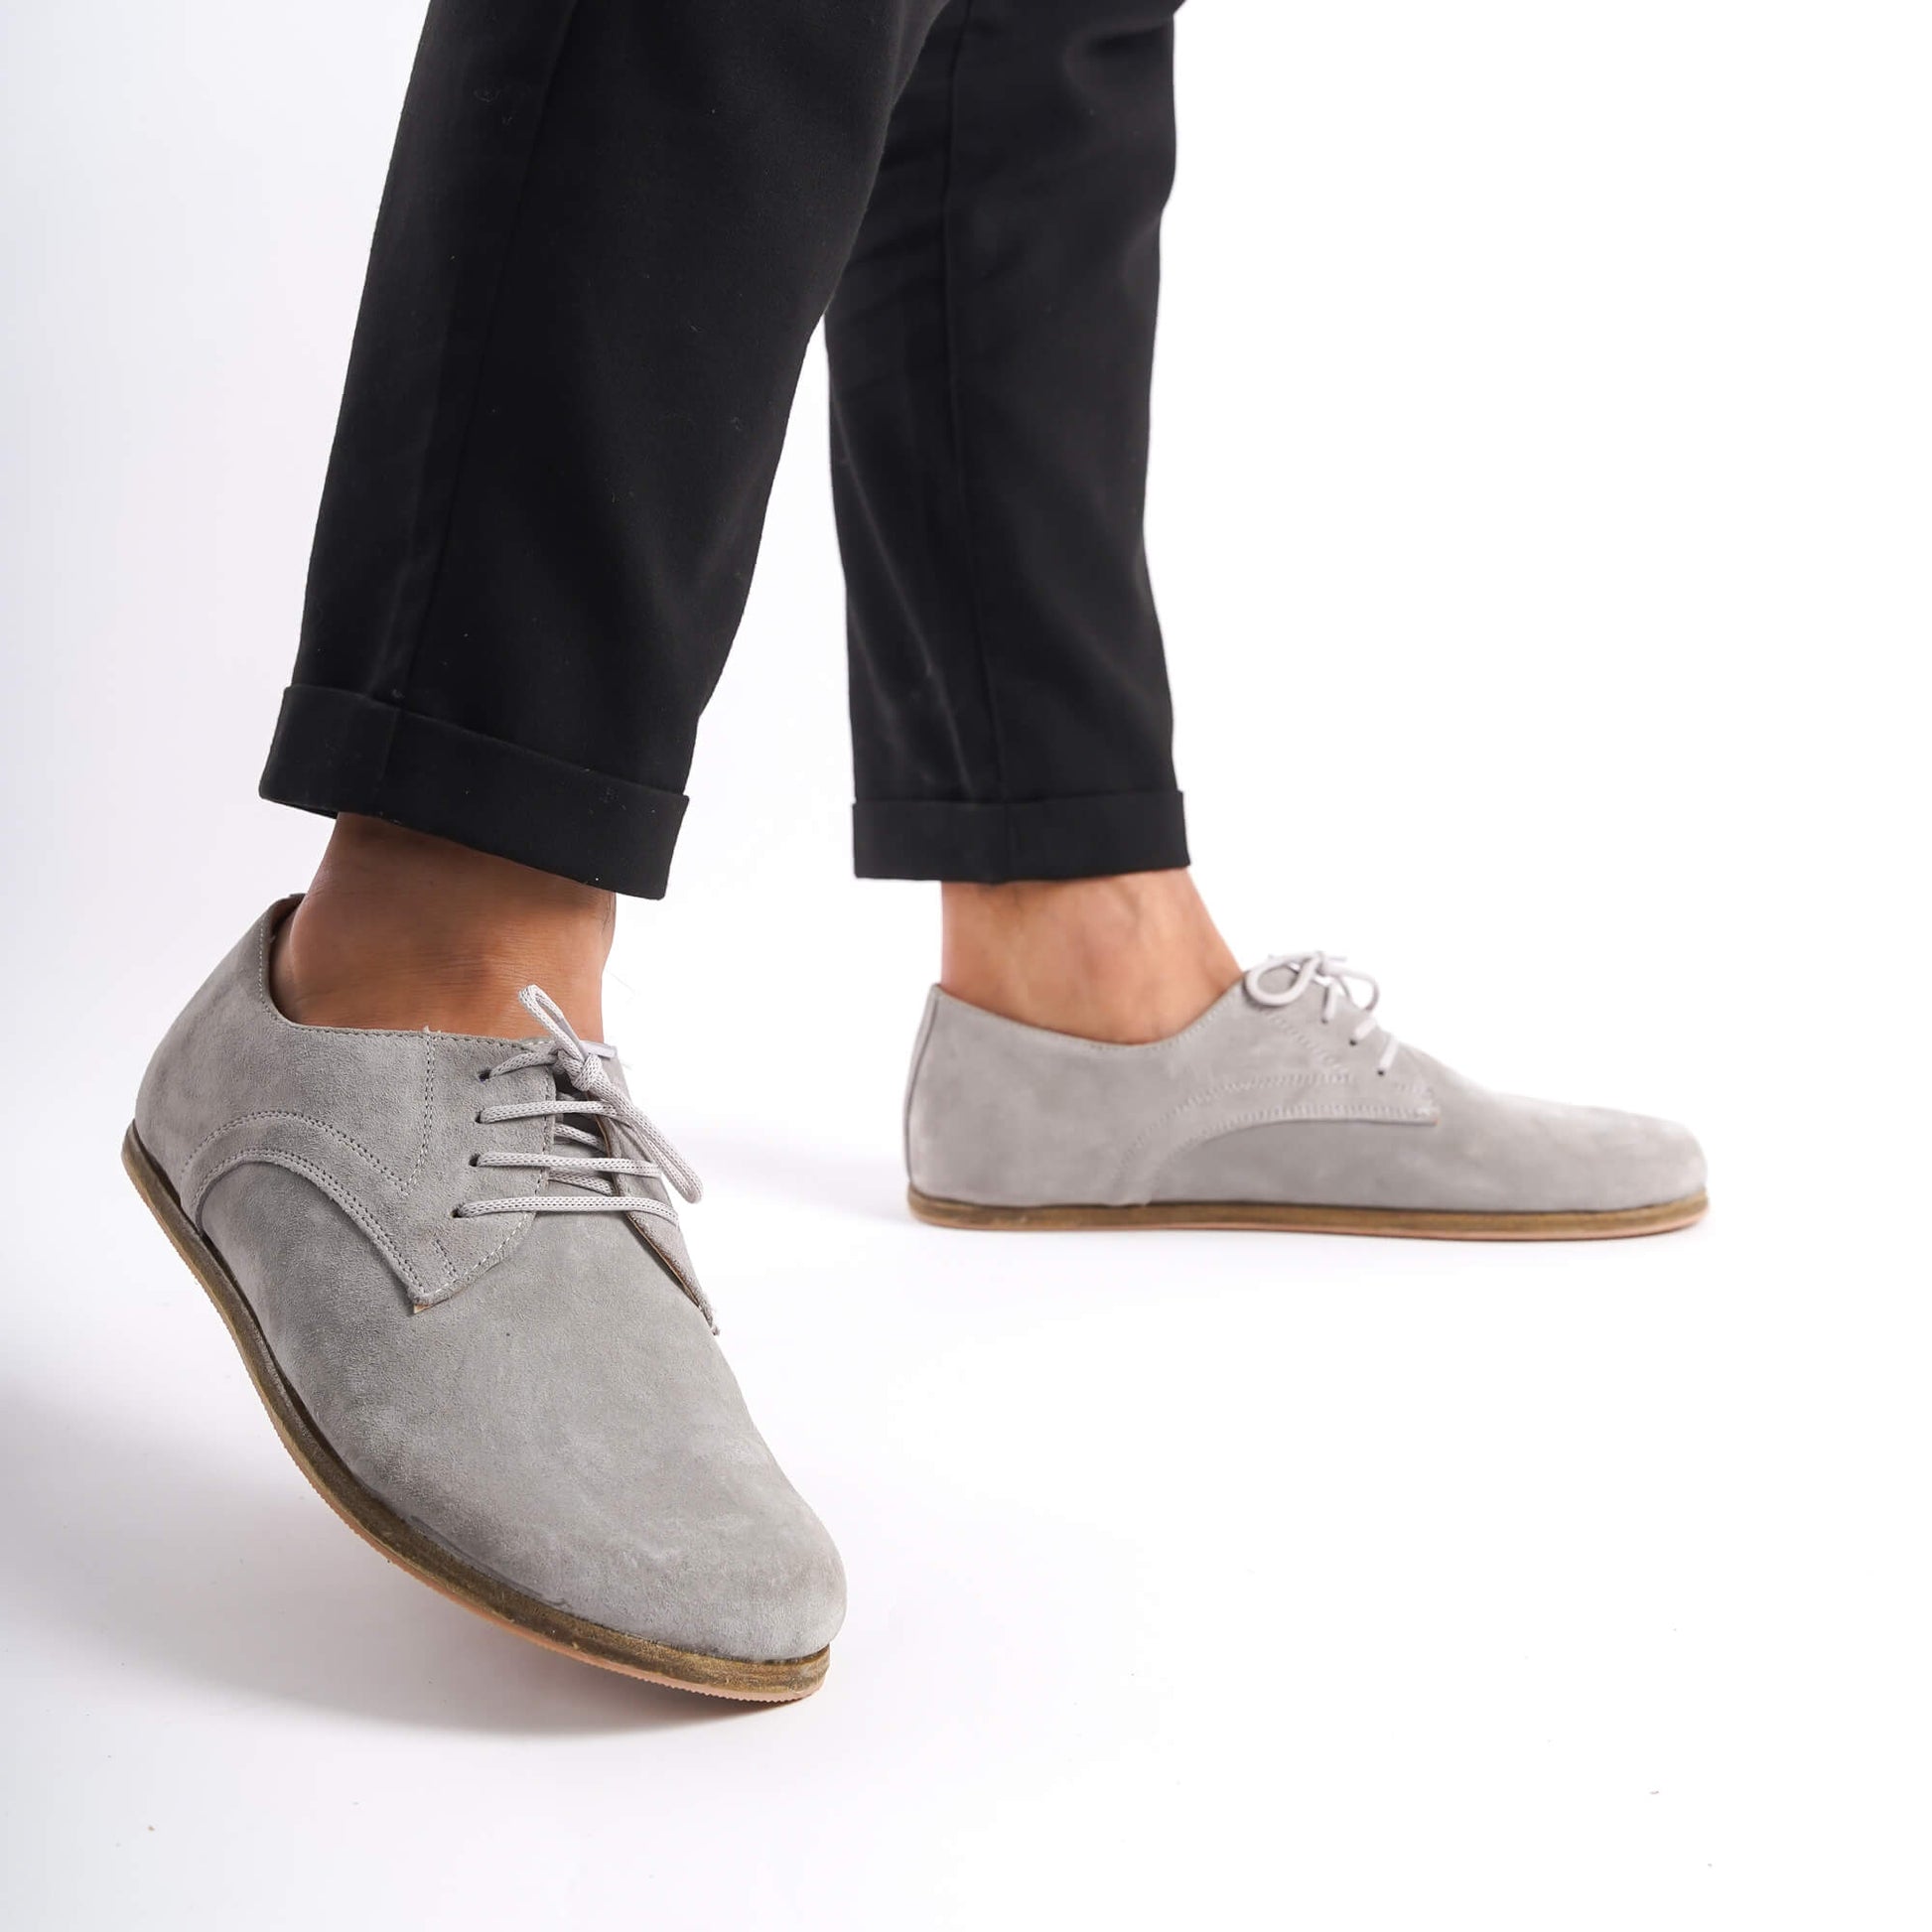 Walking shot of Locris Leather Barefoot Men's Oxfords in gray suede, highlighting their natural fit and improved foot health benefits.